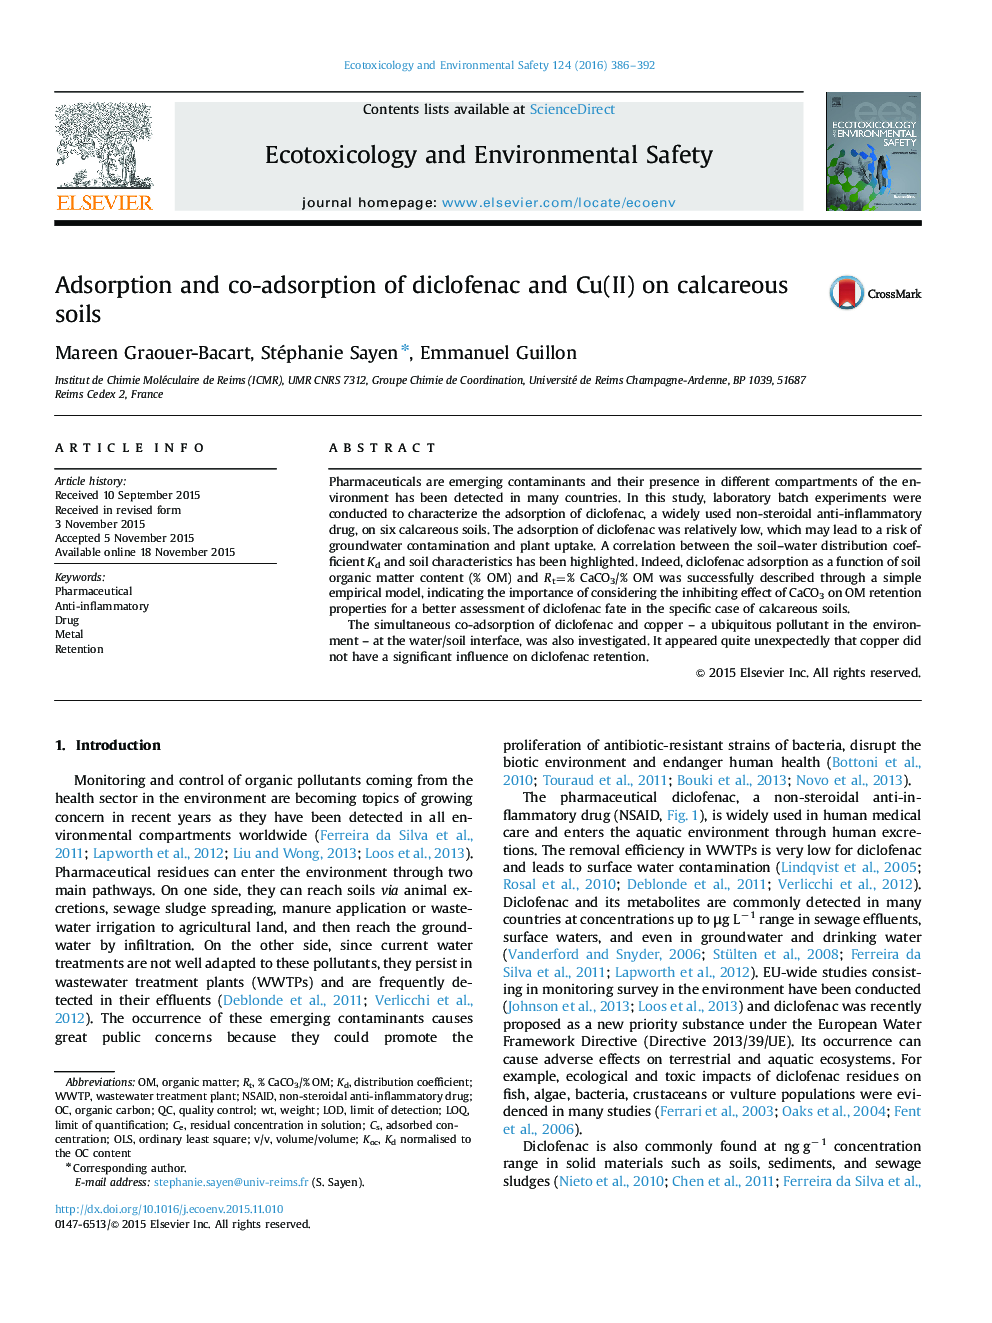 Adsorption and co-adsorption of diclofenac and Cu(II) on calcareous soils